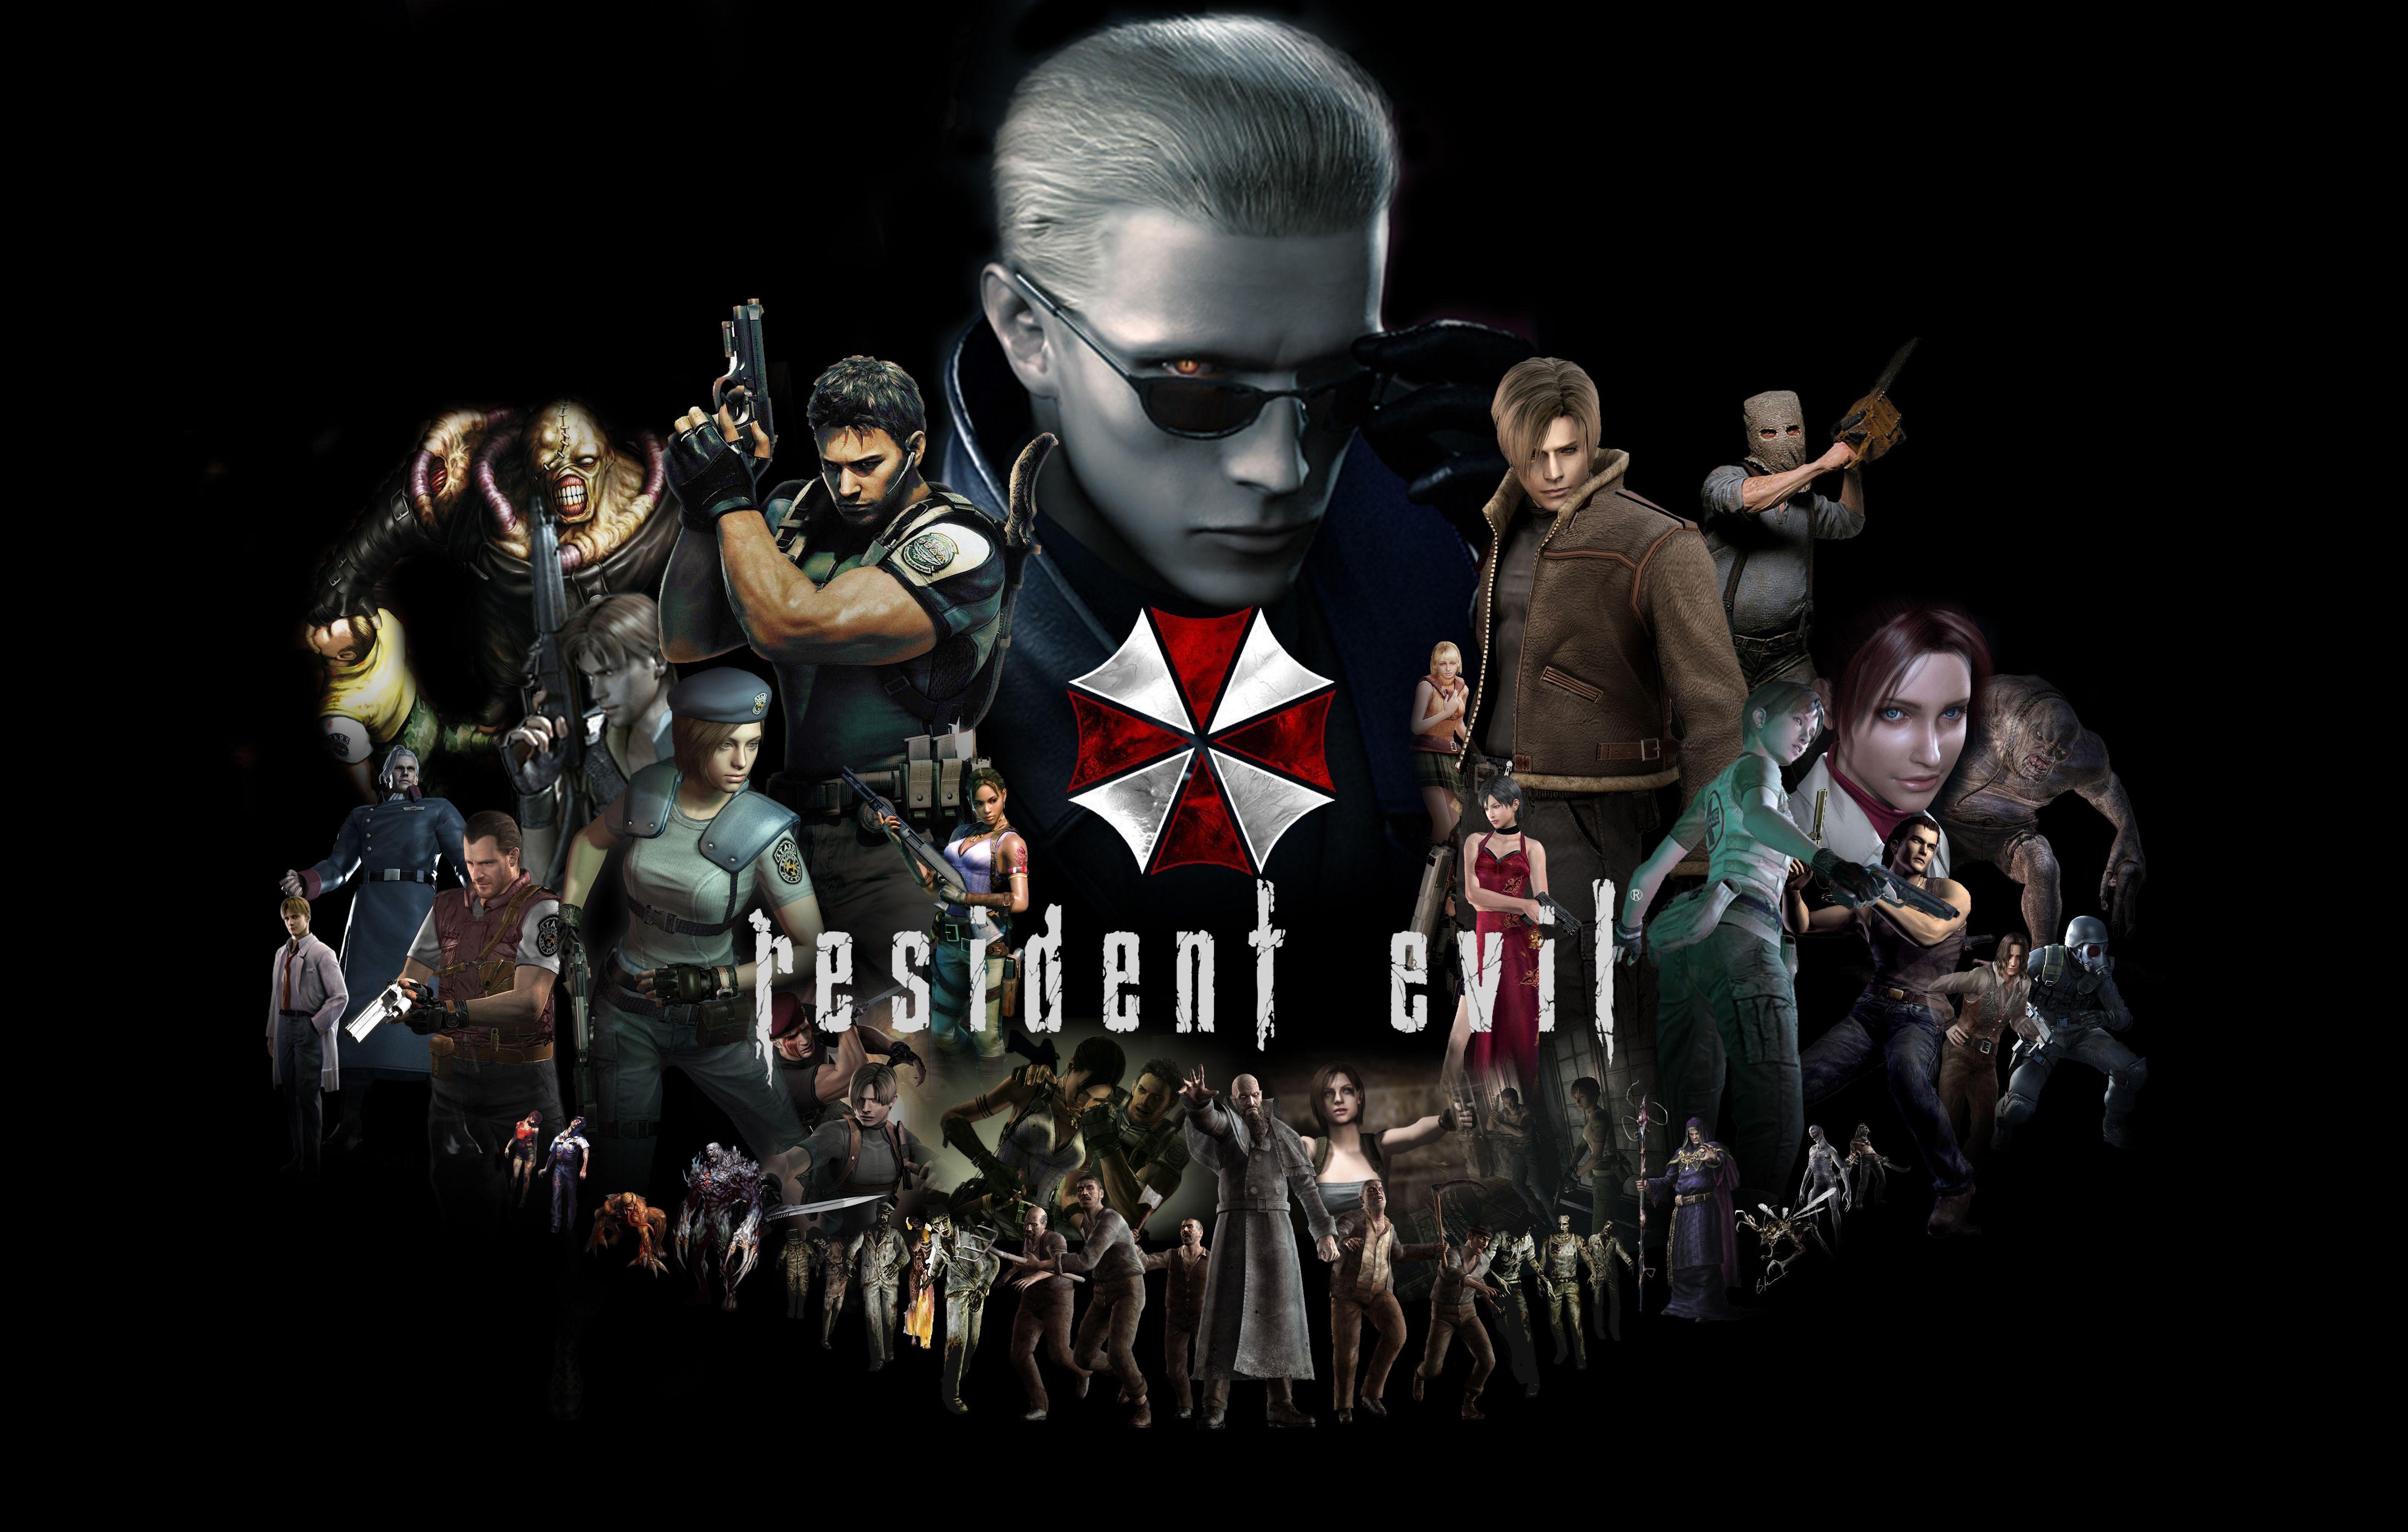 370+ Resident Evil HD Wallpapers and Backgrounds